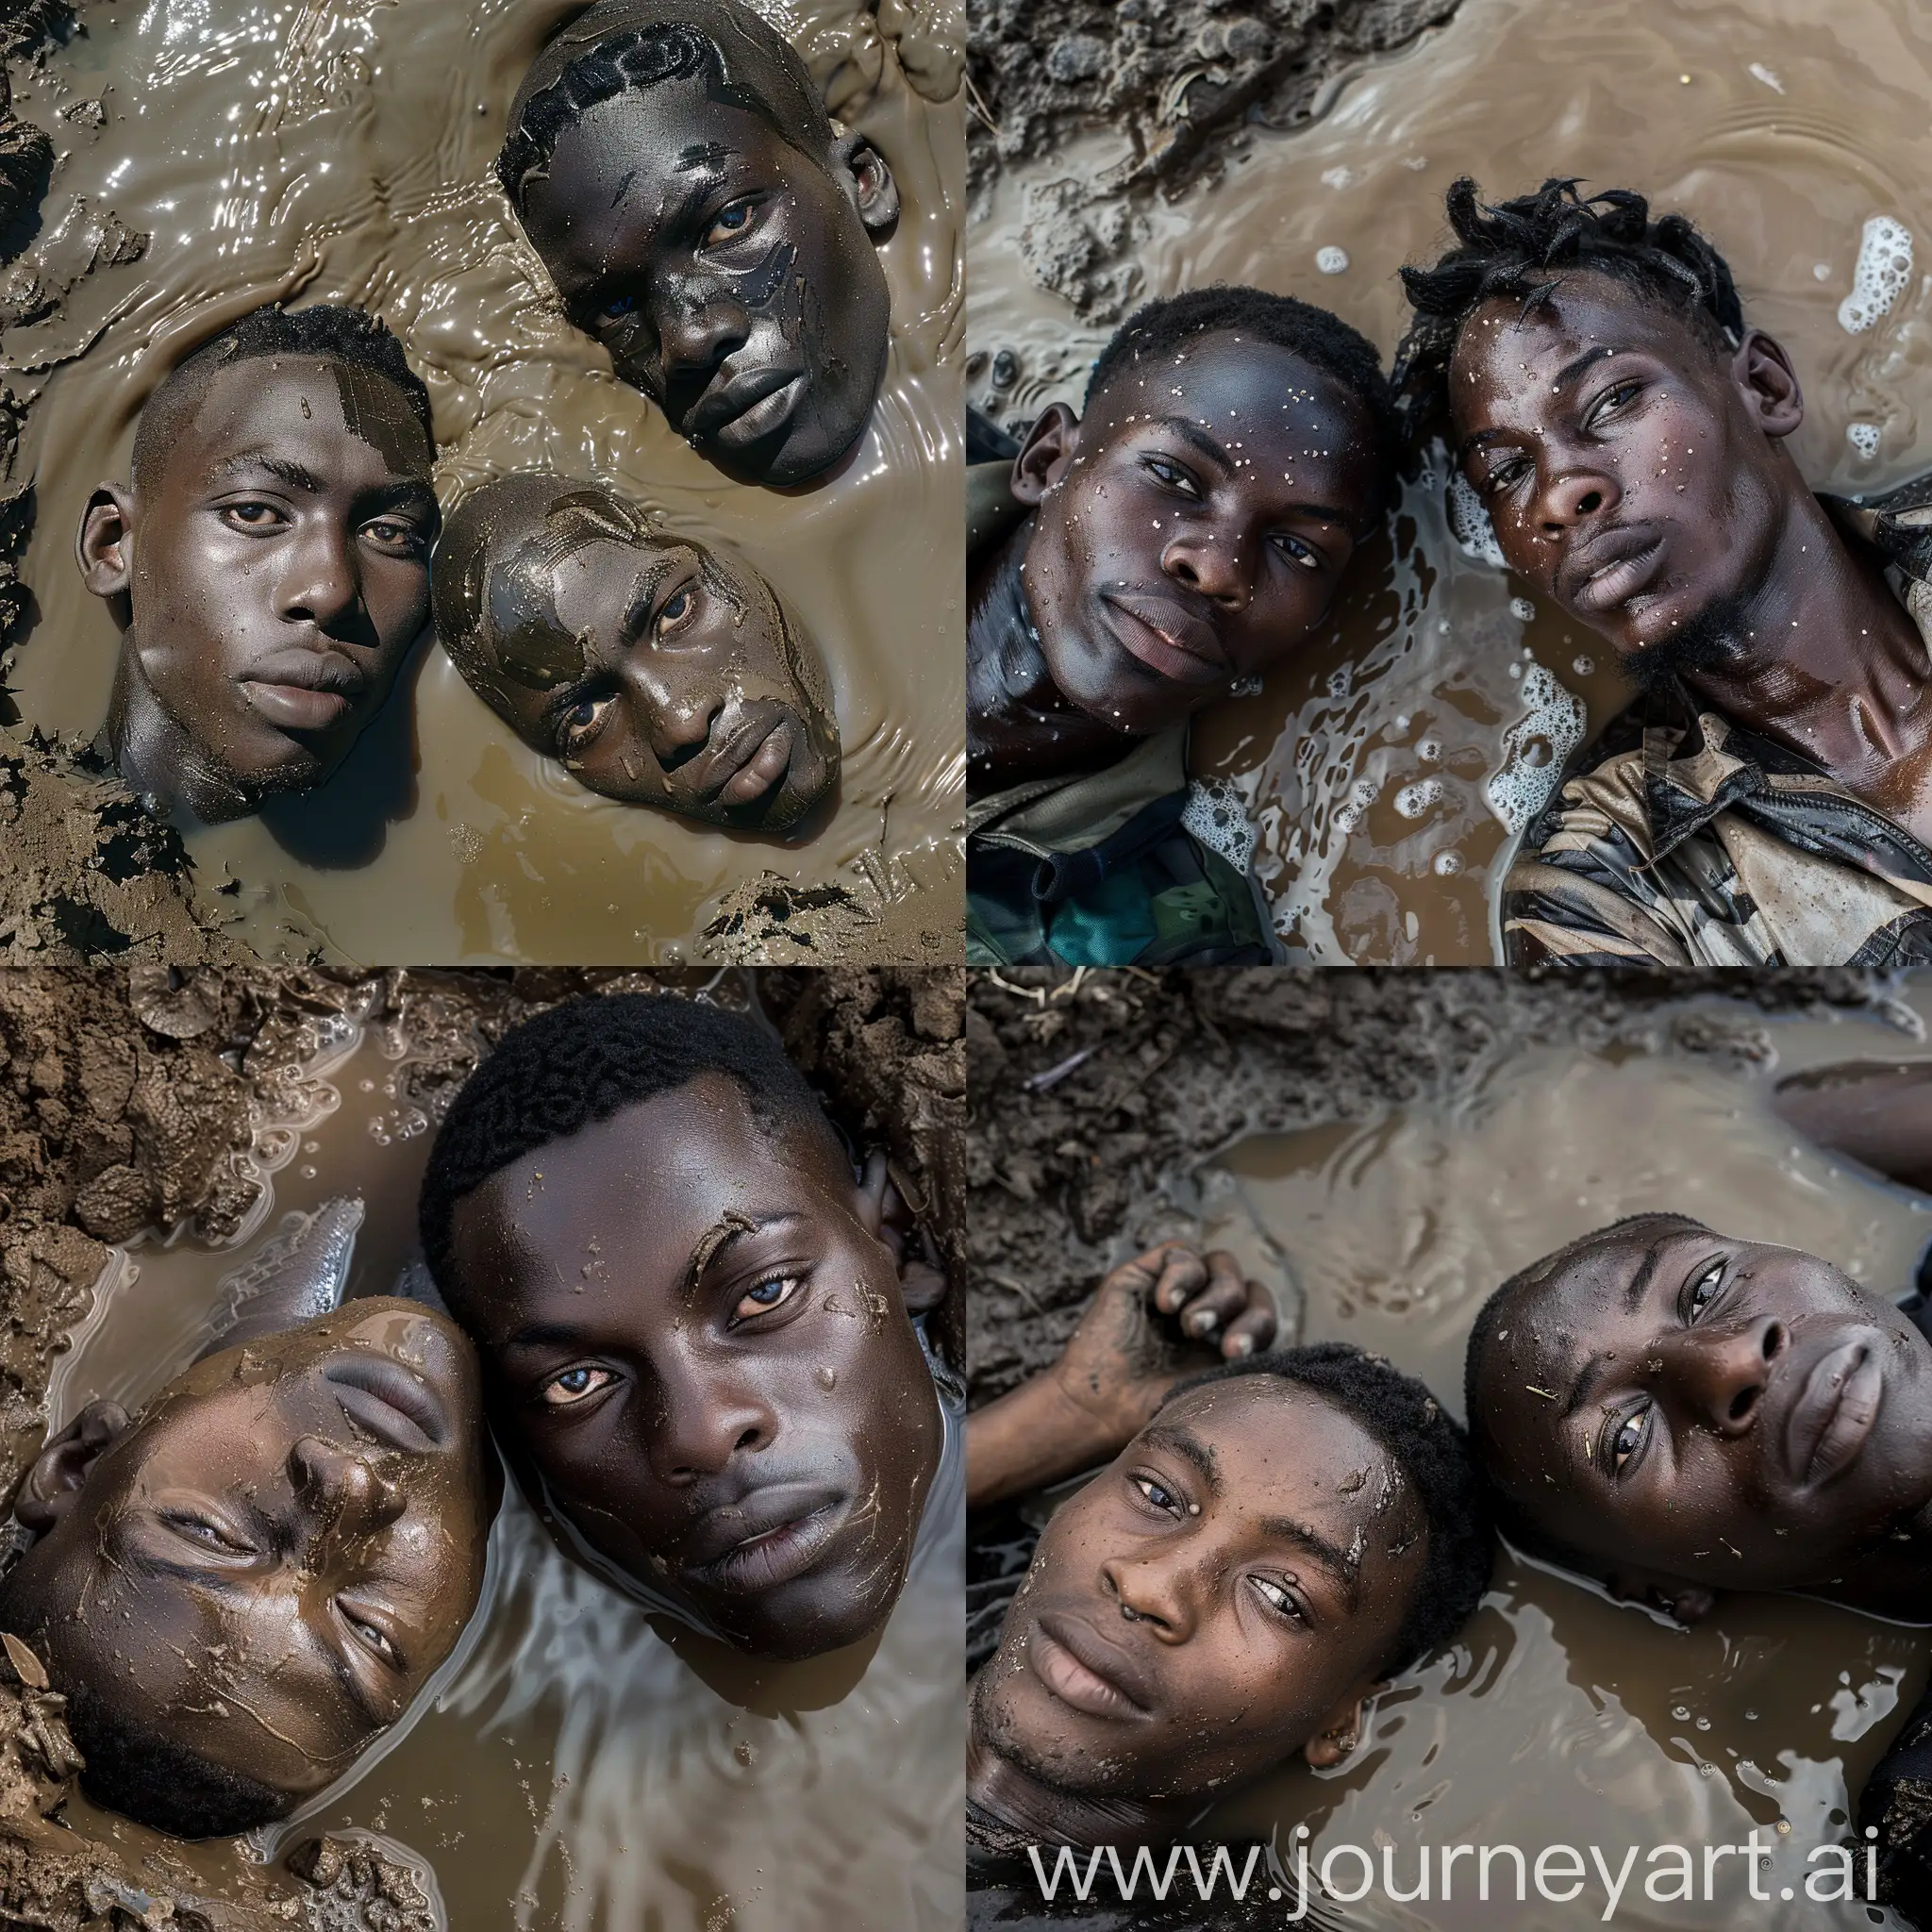 Realistic upclose photograph of 2 young african men lying in a shallow muddy water pond